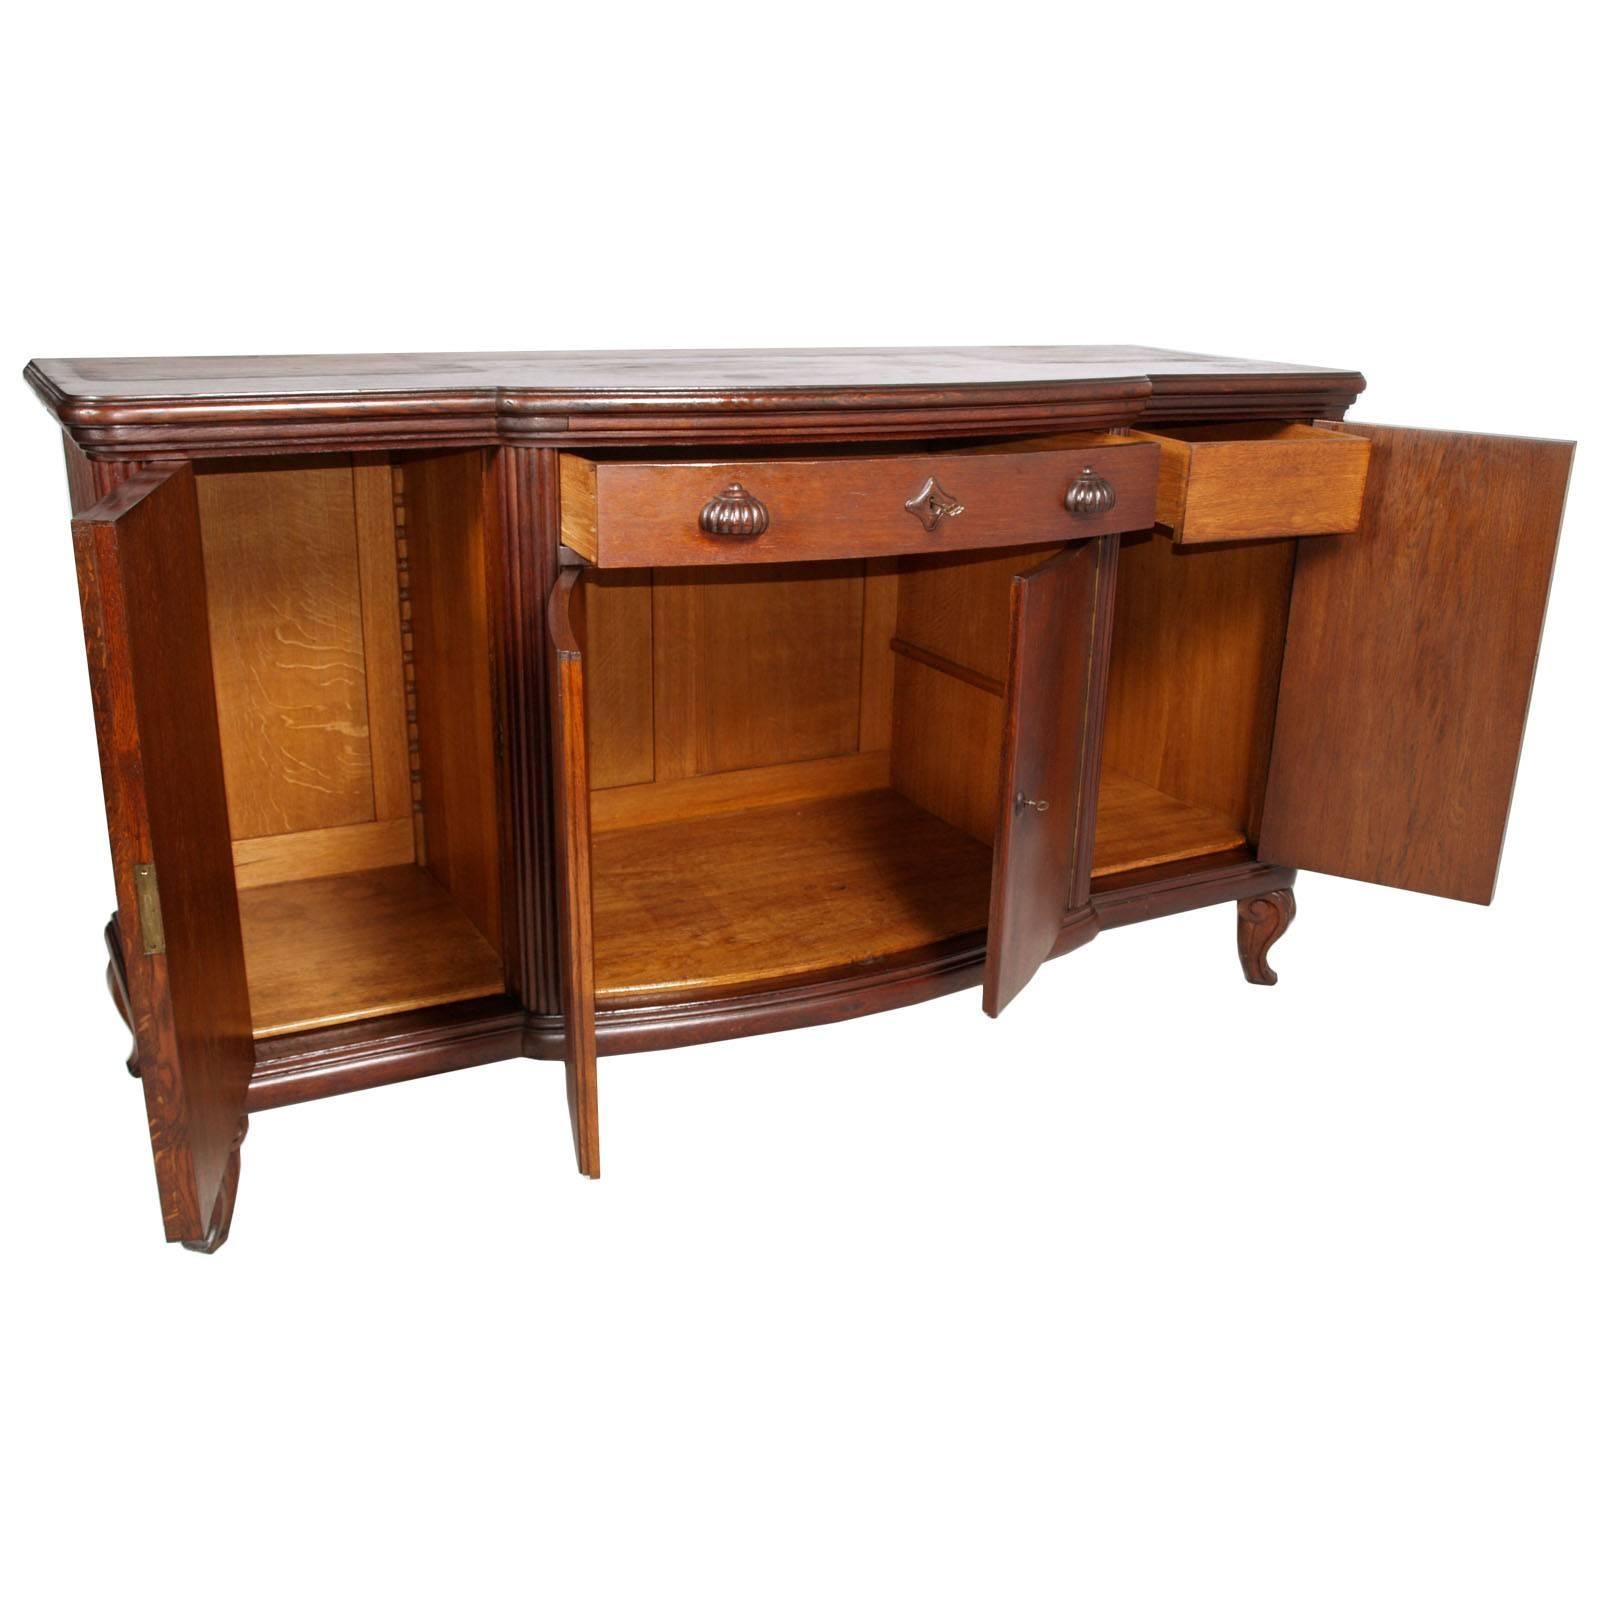 Swiss early 20th century important, massive and robust sideboard Biedermeier/Art Deco credenza sideboard in massive oak by E. Schwarz Zurich with three drawers and four doors, polished to wax.

Measure in cm: W 200 x D 74 (63) x H 111.